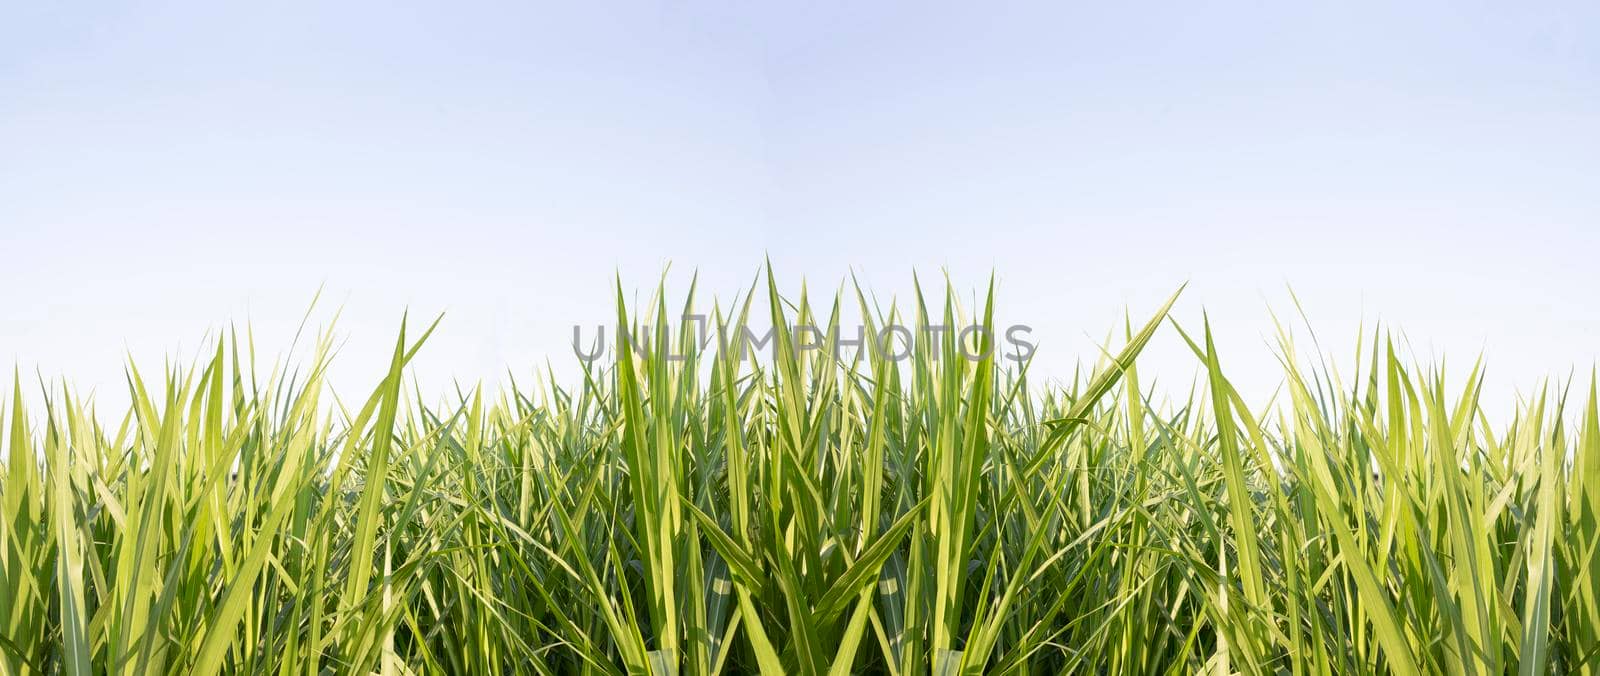 Green grass with blue sky background by drpnncpp